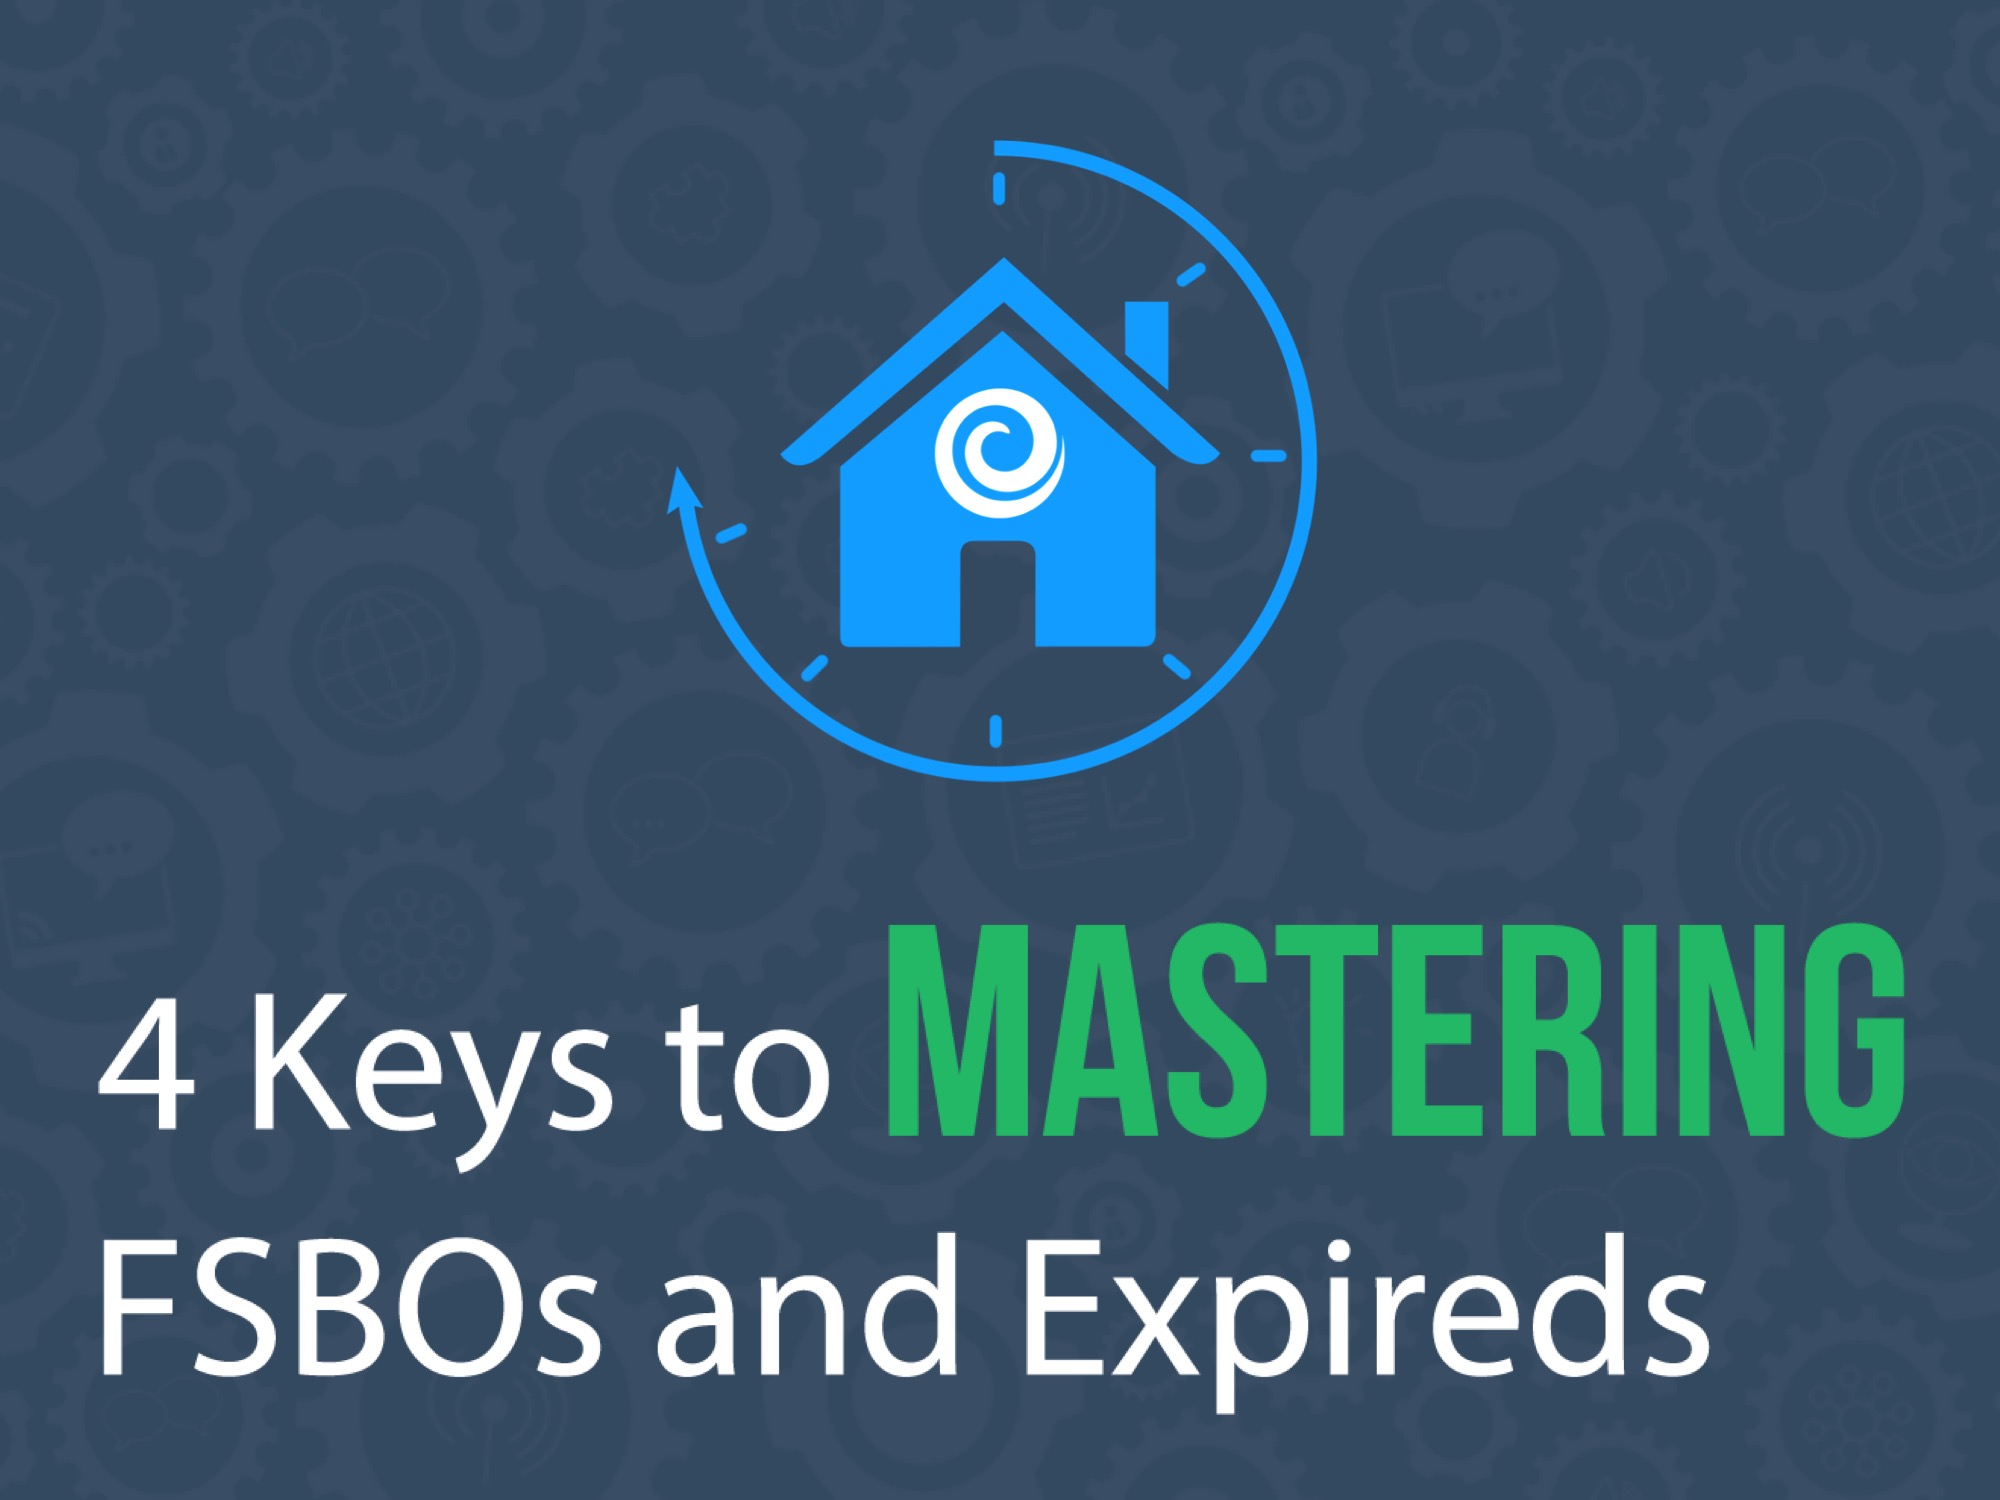 4 Keys to Mastering FSBOs and Expireds | Keeping Current Matters